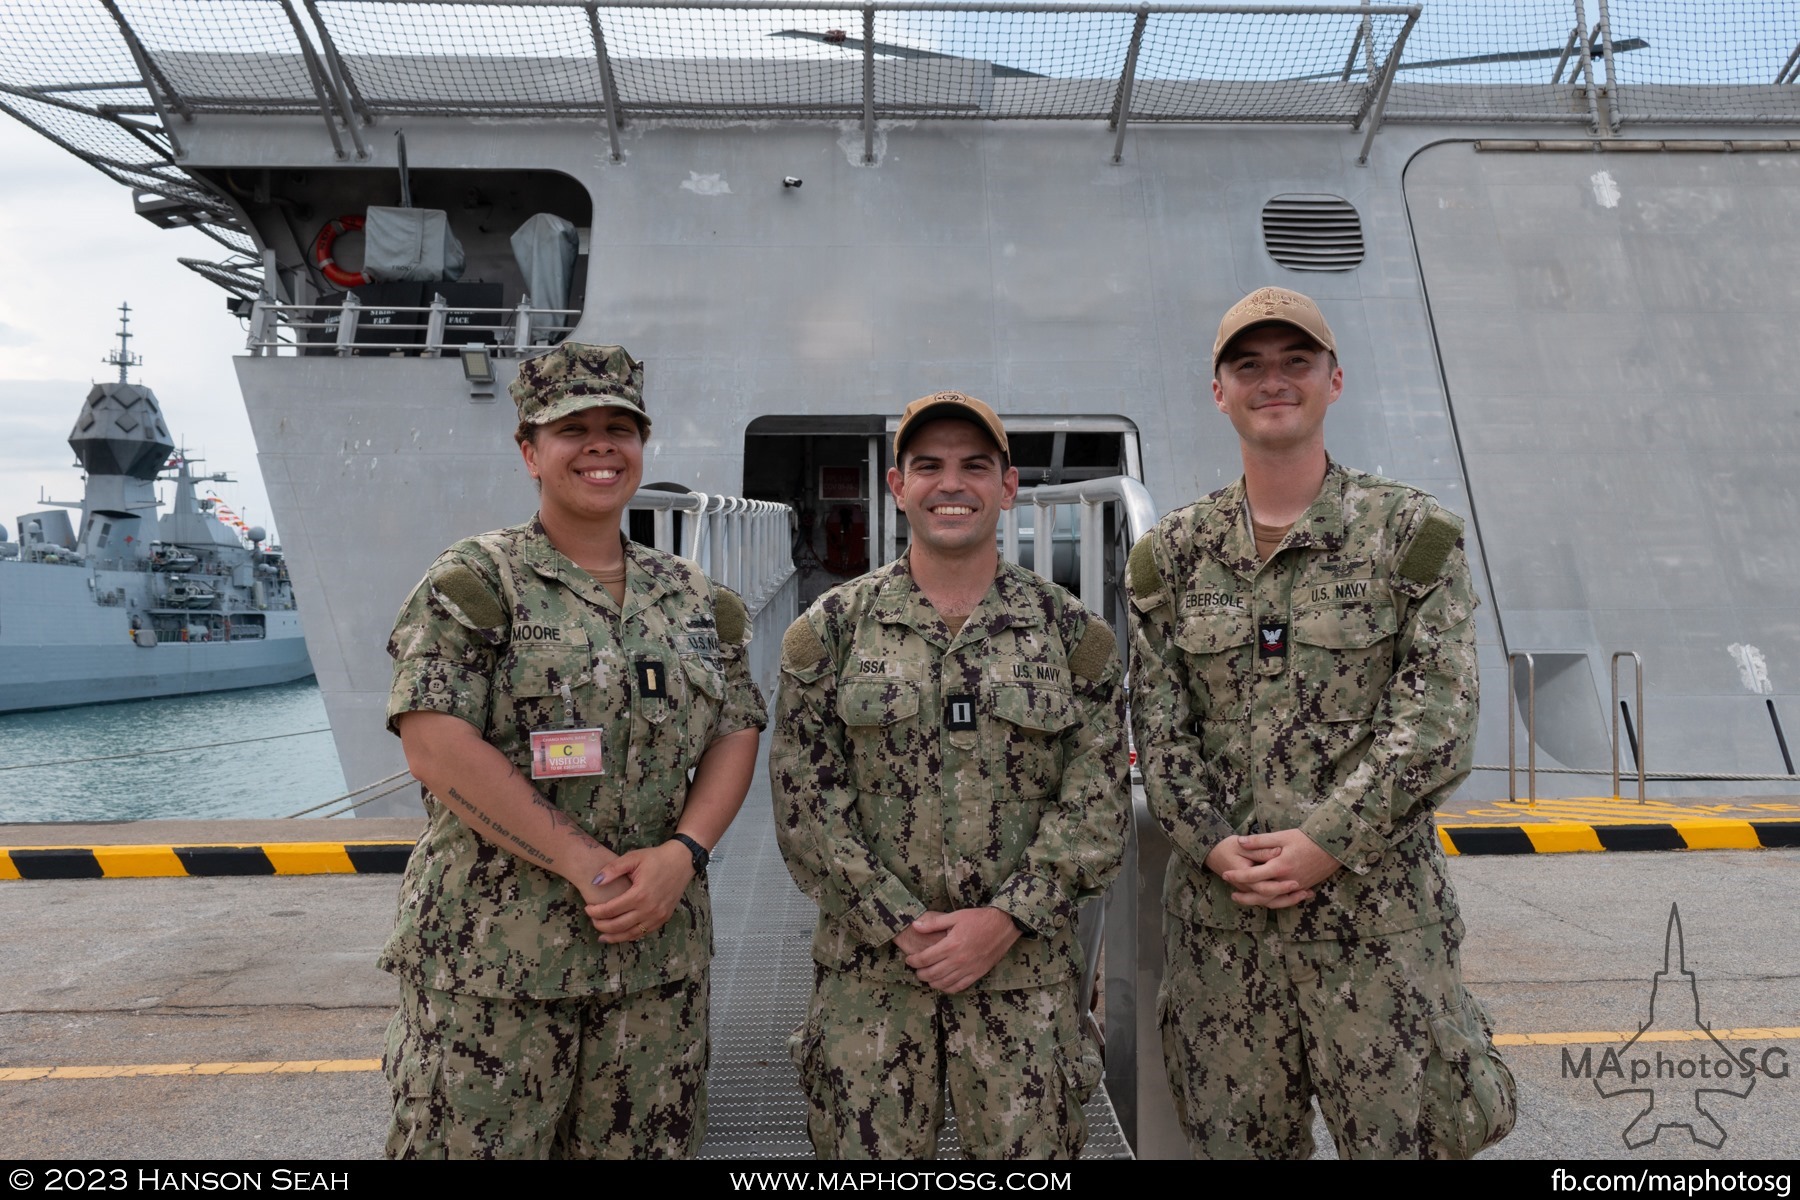 Crew members of the USS Mobile (LCS-26) that facilitated the guided tour of the ship